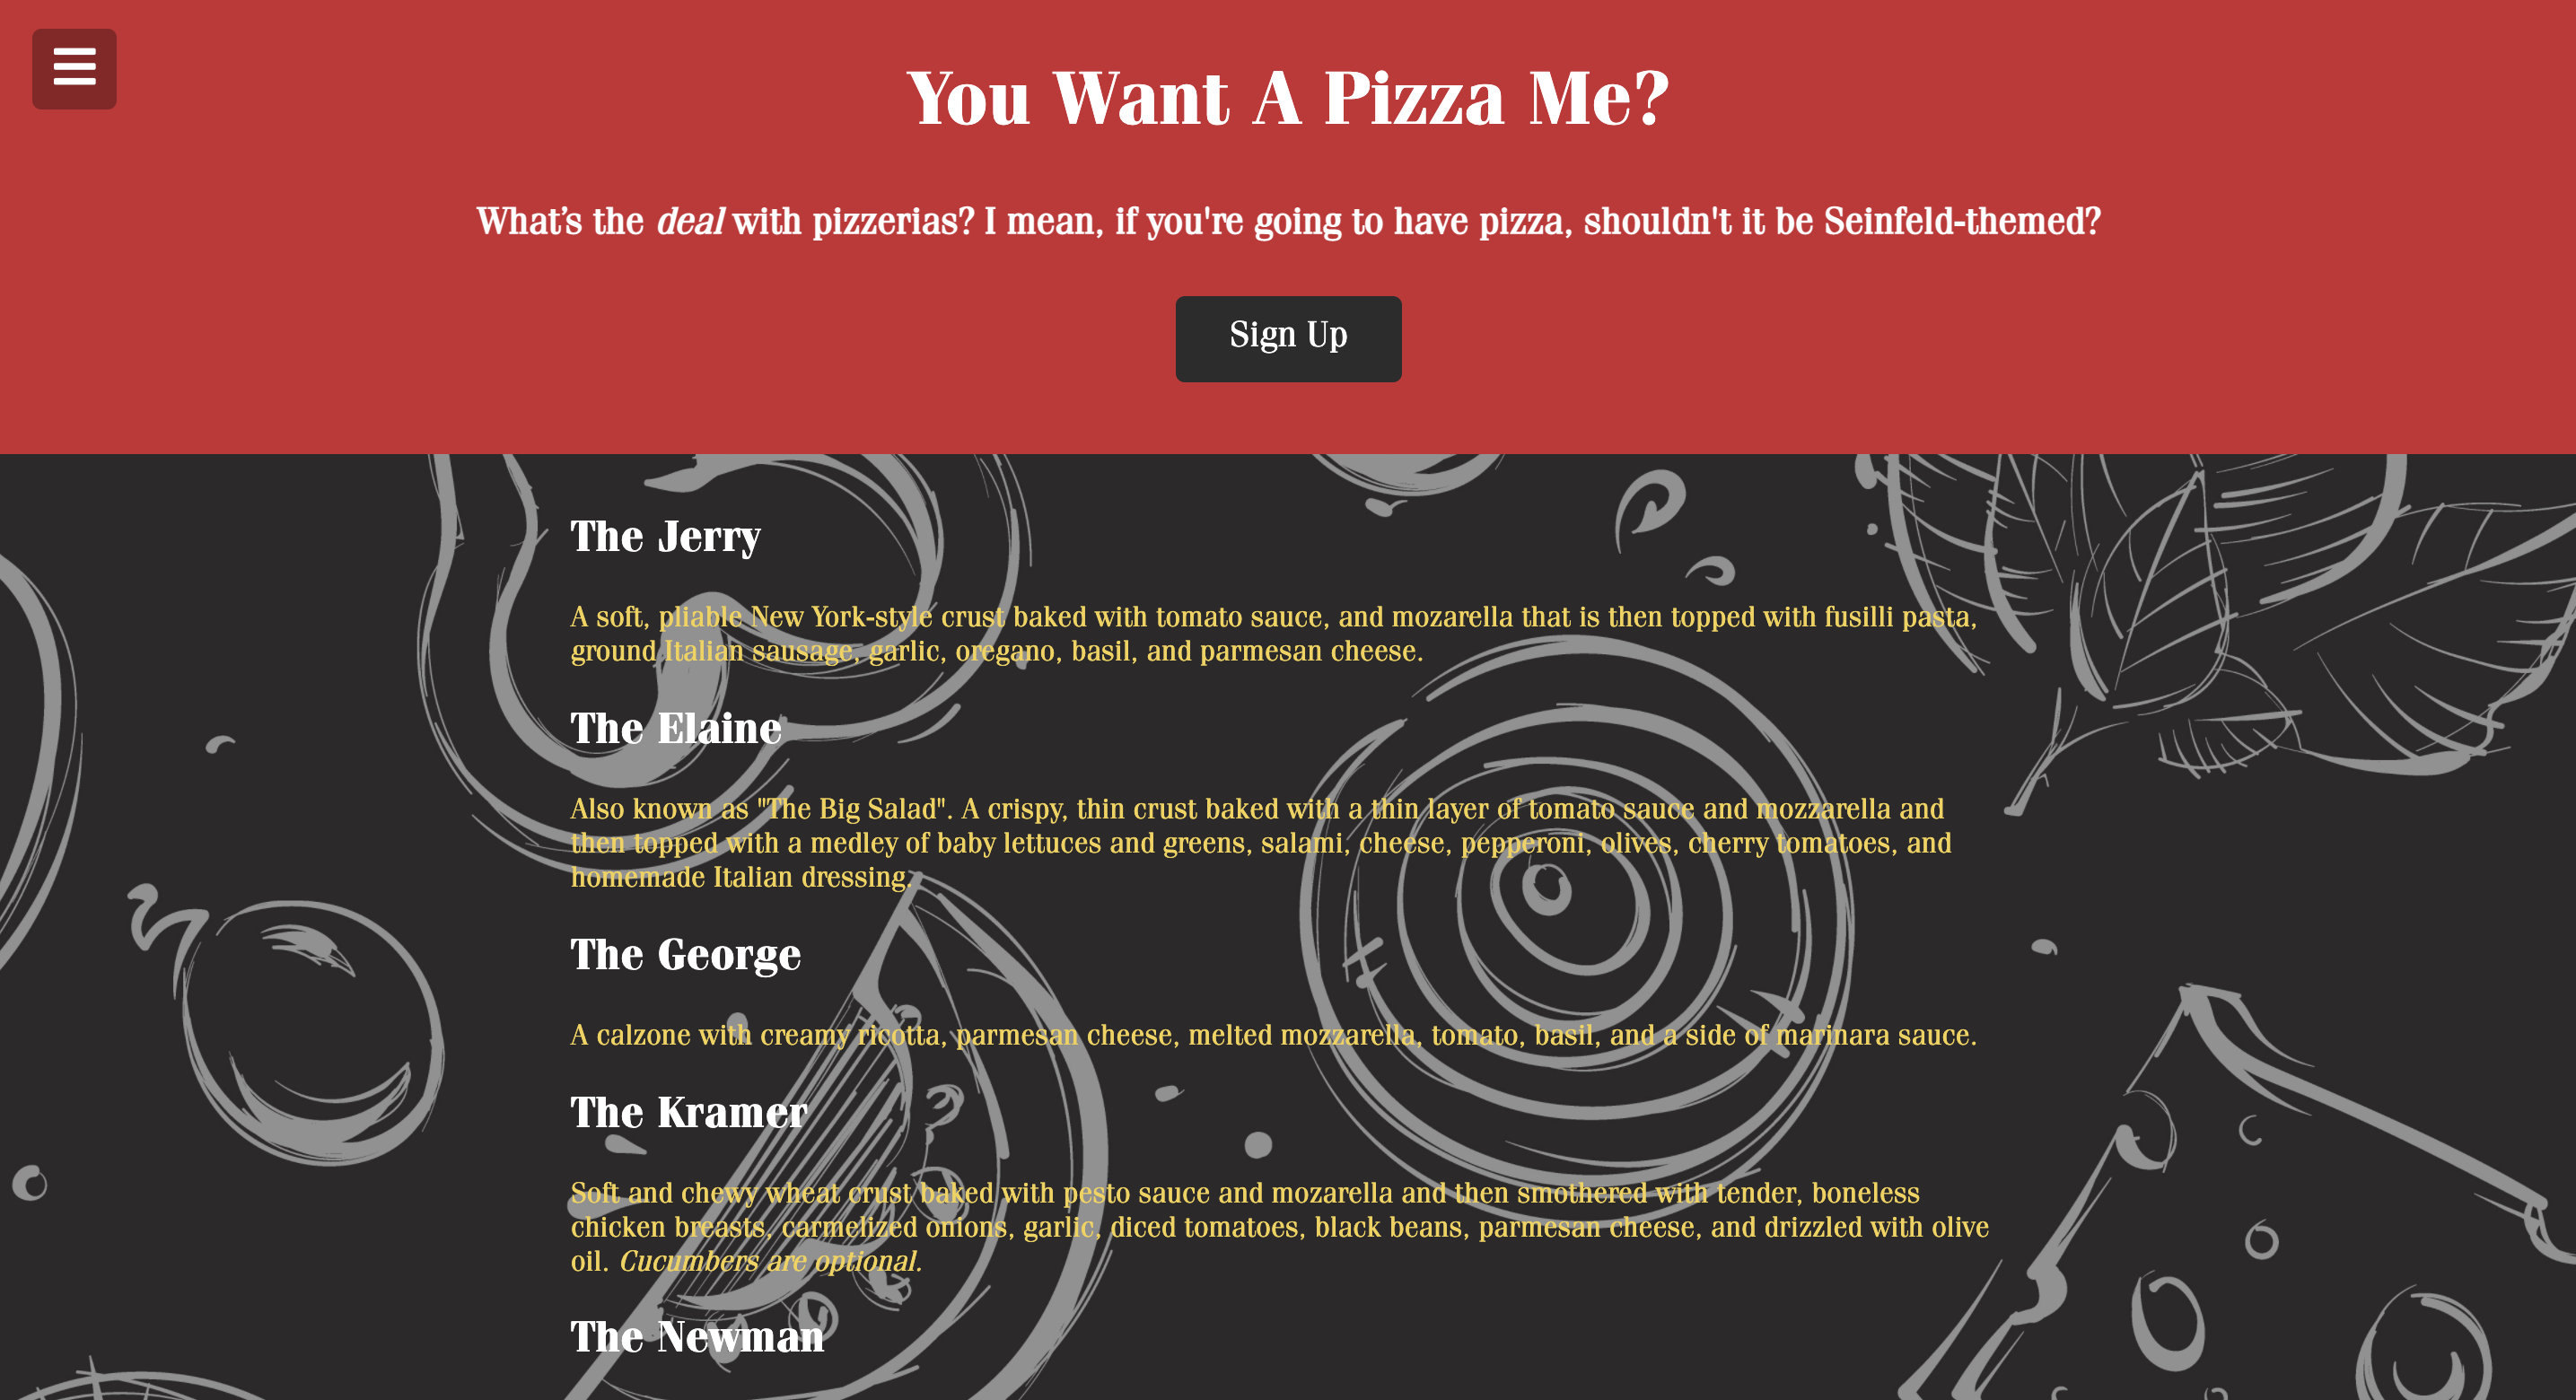 You Want A Pizza Me? Landing Page